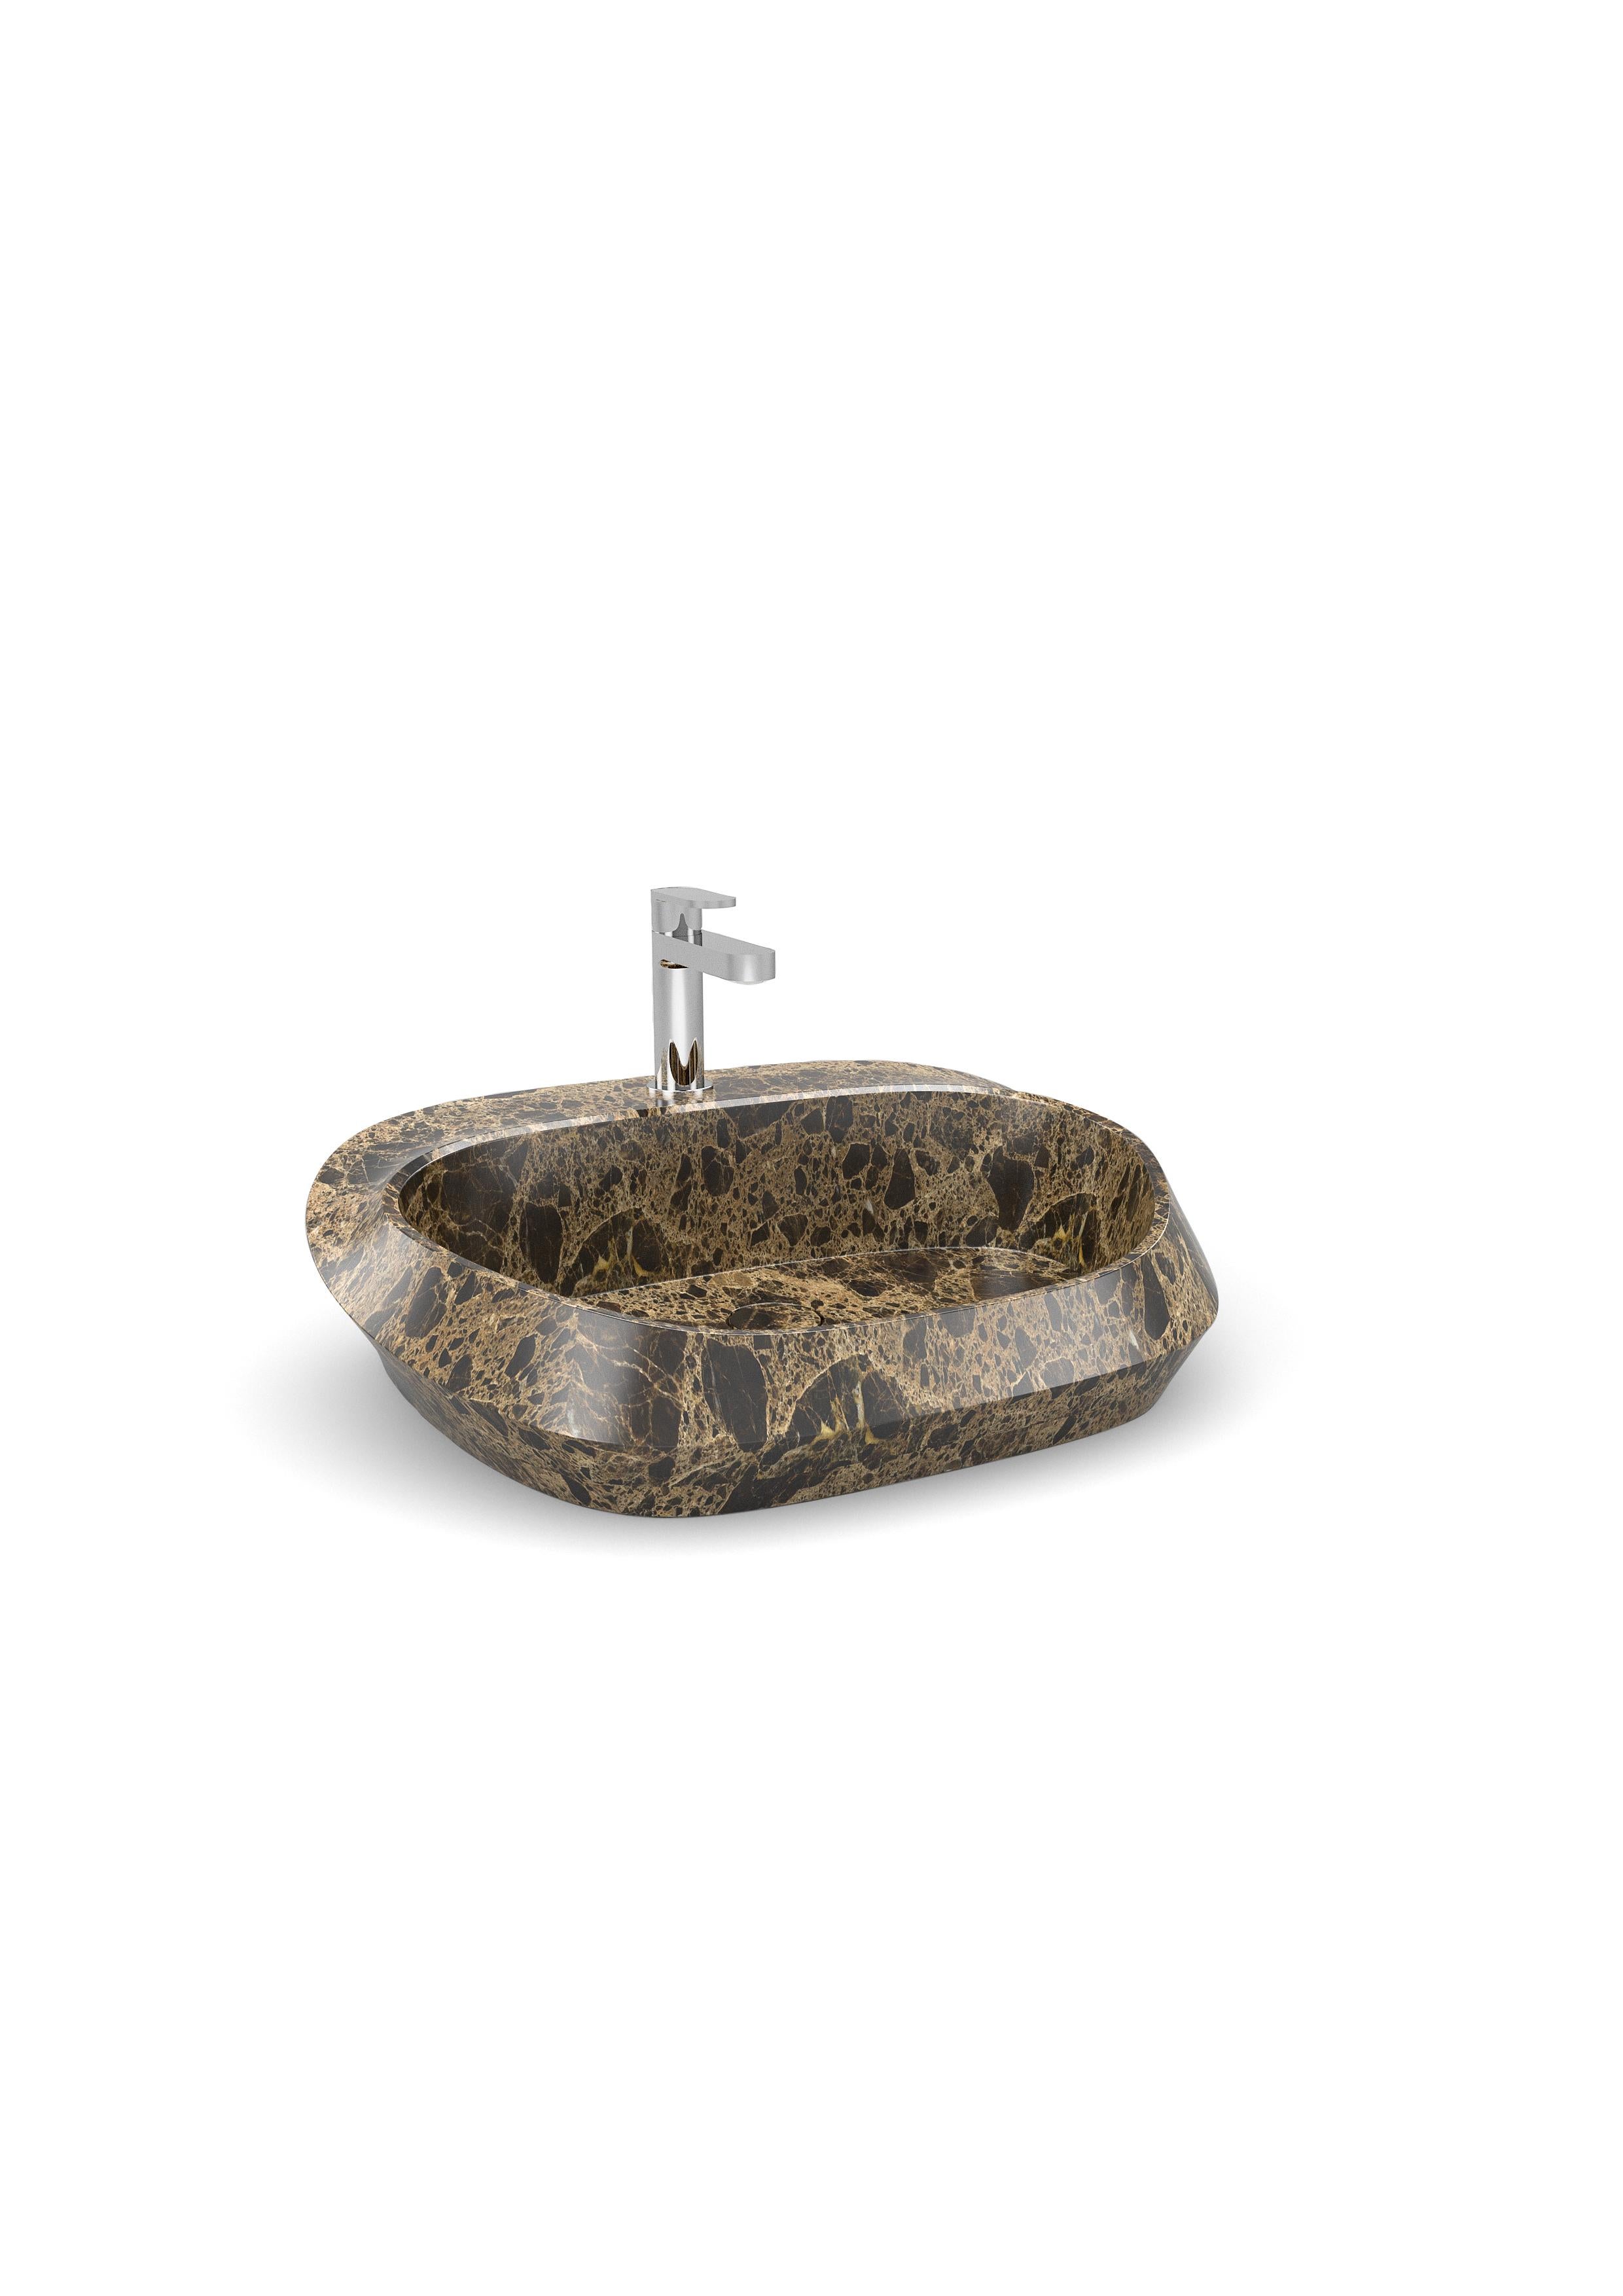 Small Opera Tosca washbasin by Marmi Serafini
Materials: Emperador Brown marble.
Dimensions: D 44 x W 58 x H 17 cm
Available in other marbles.
Tap not included.

Tosca is a magnificent washbasin made of a single solid piece of marble.
The large